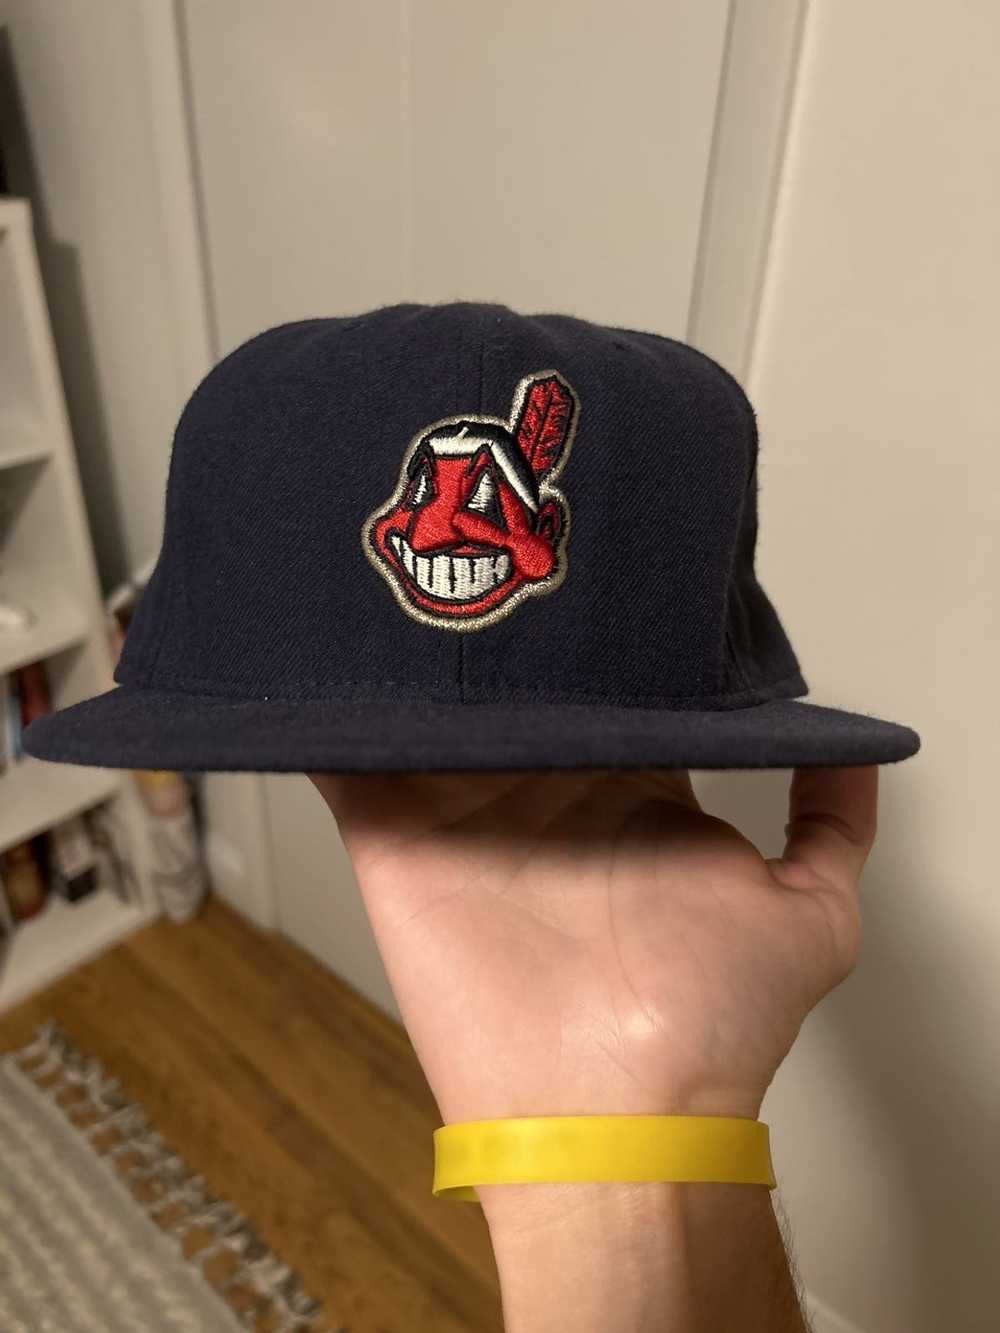 FOTD Cleveland Indians “Chief Wahoo” Camo brim (Grey UV). This is